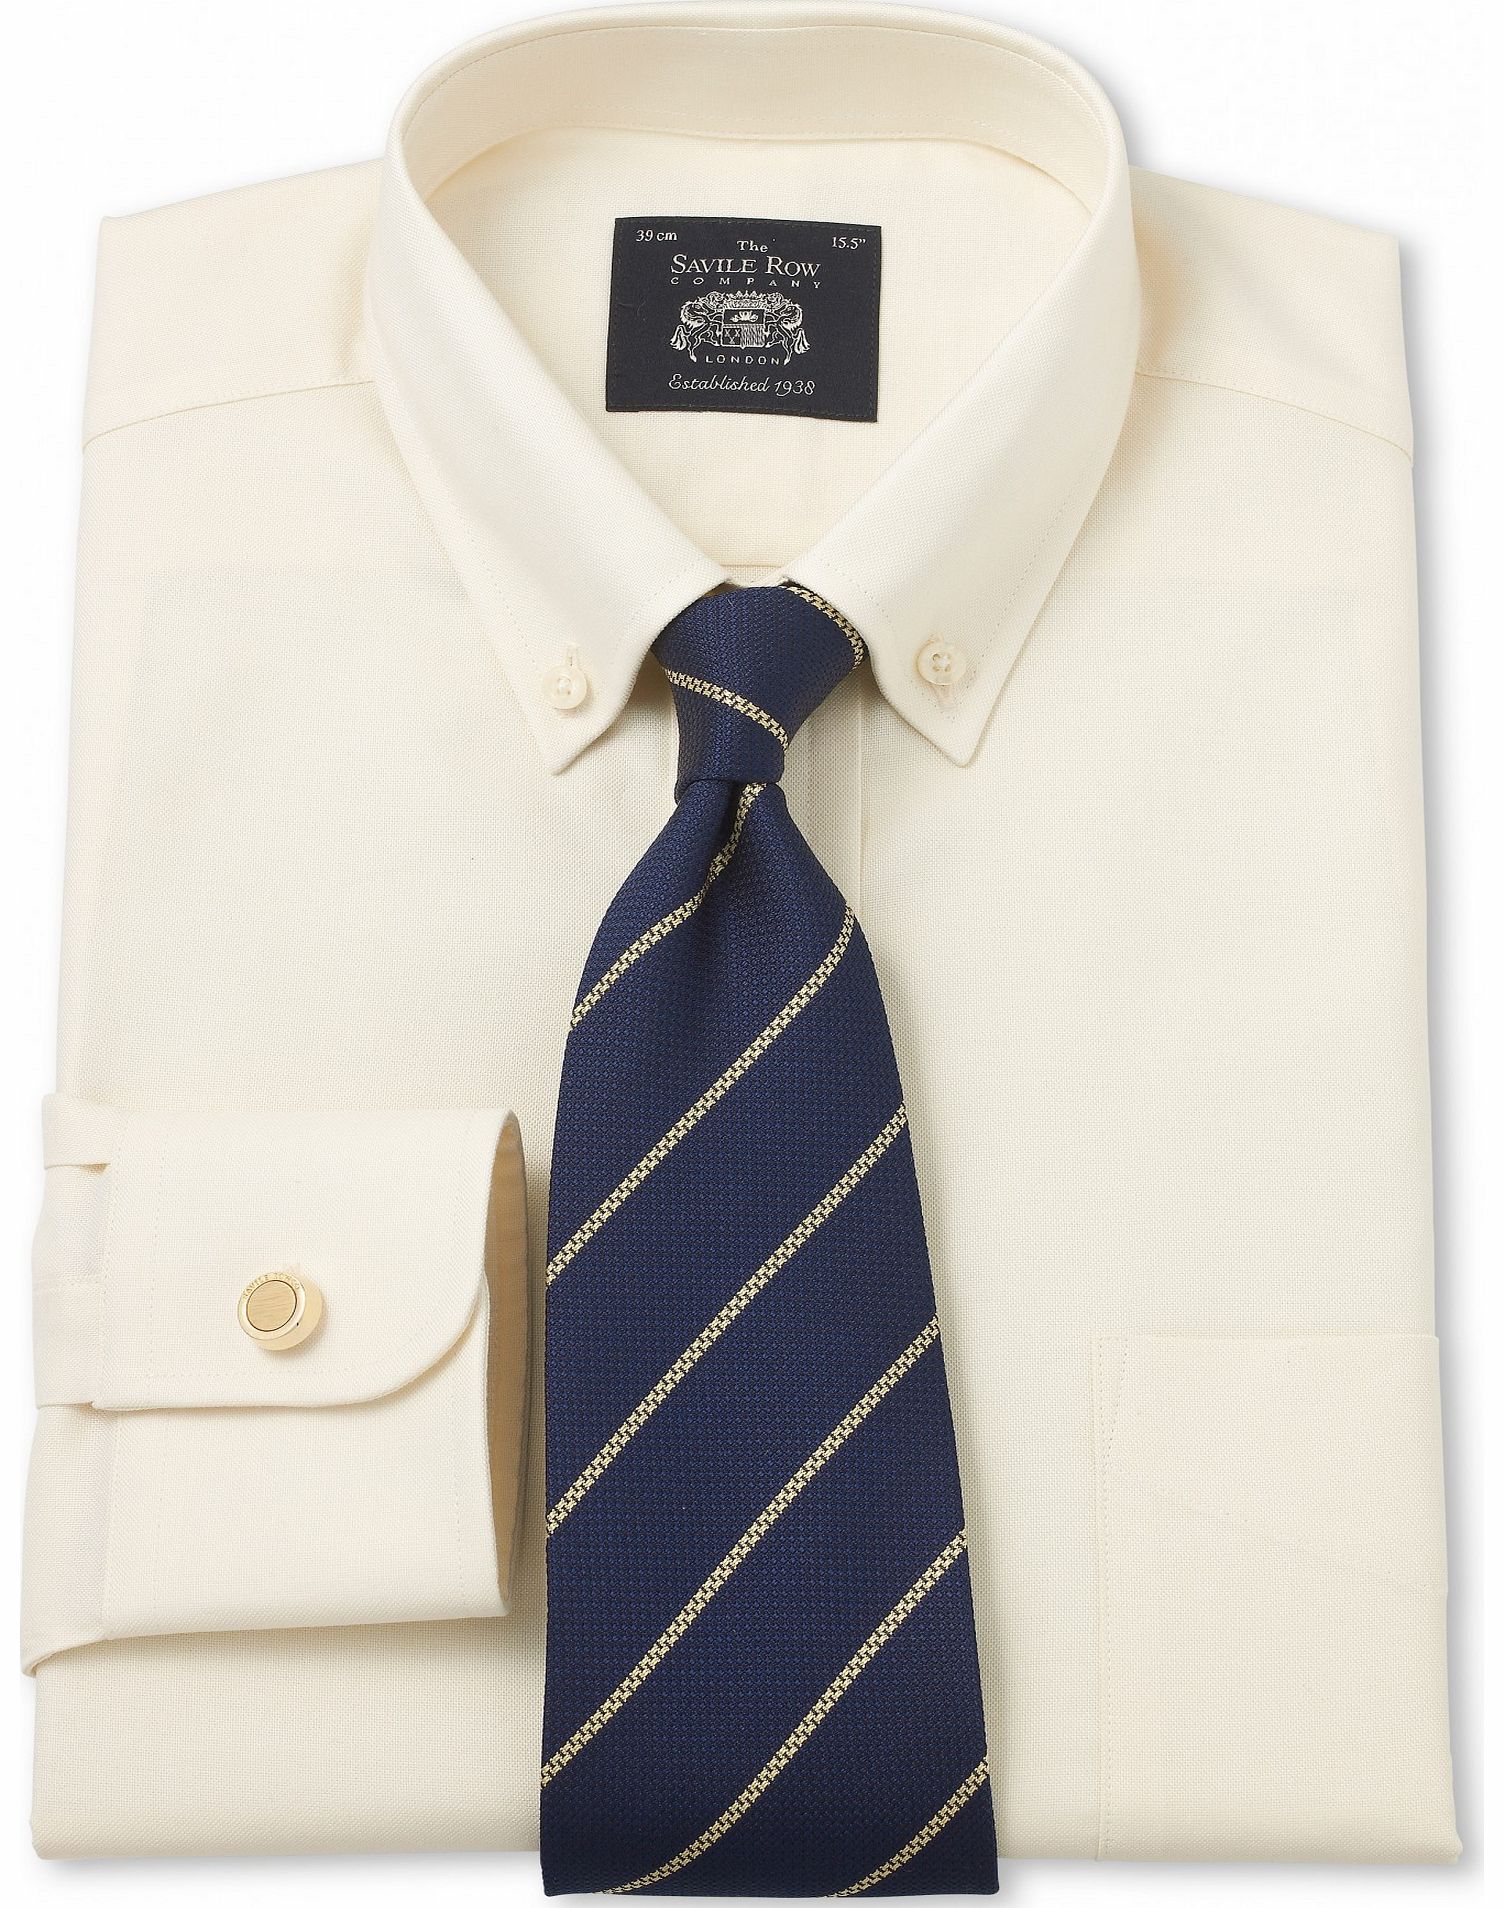 Savile Row Company Cream Pinpoint Classic Fit Shirt 18 1/2``